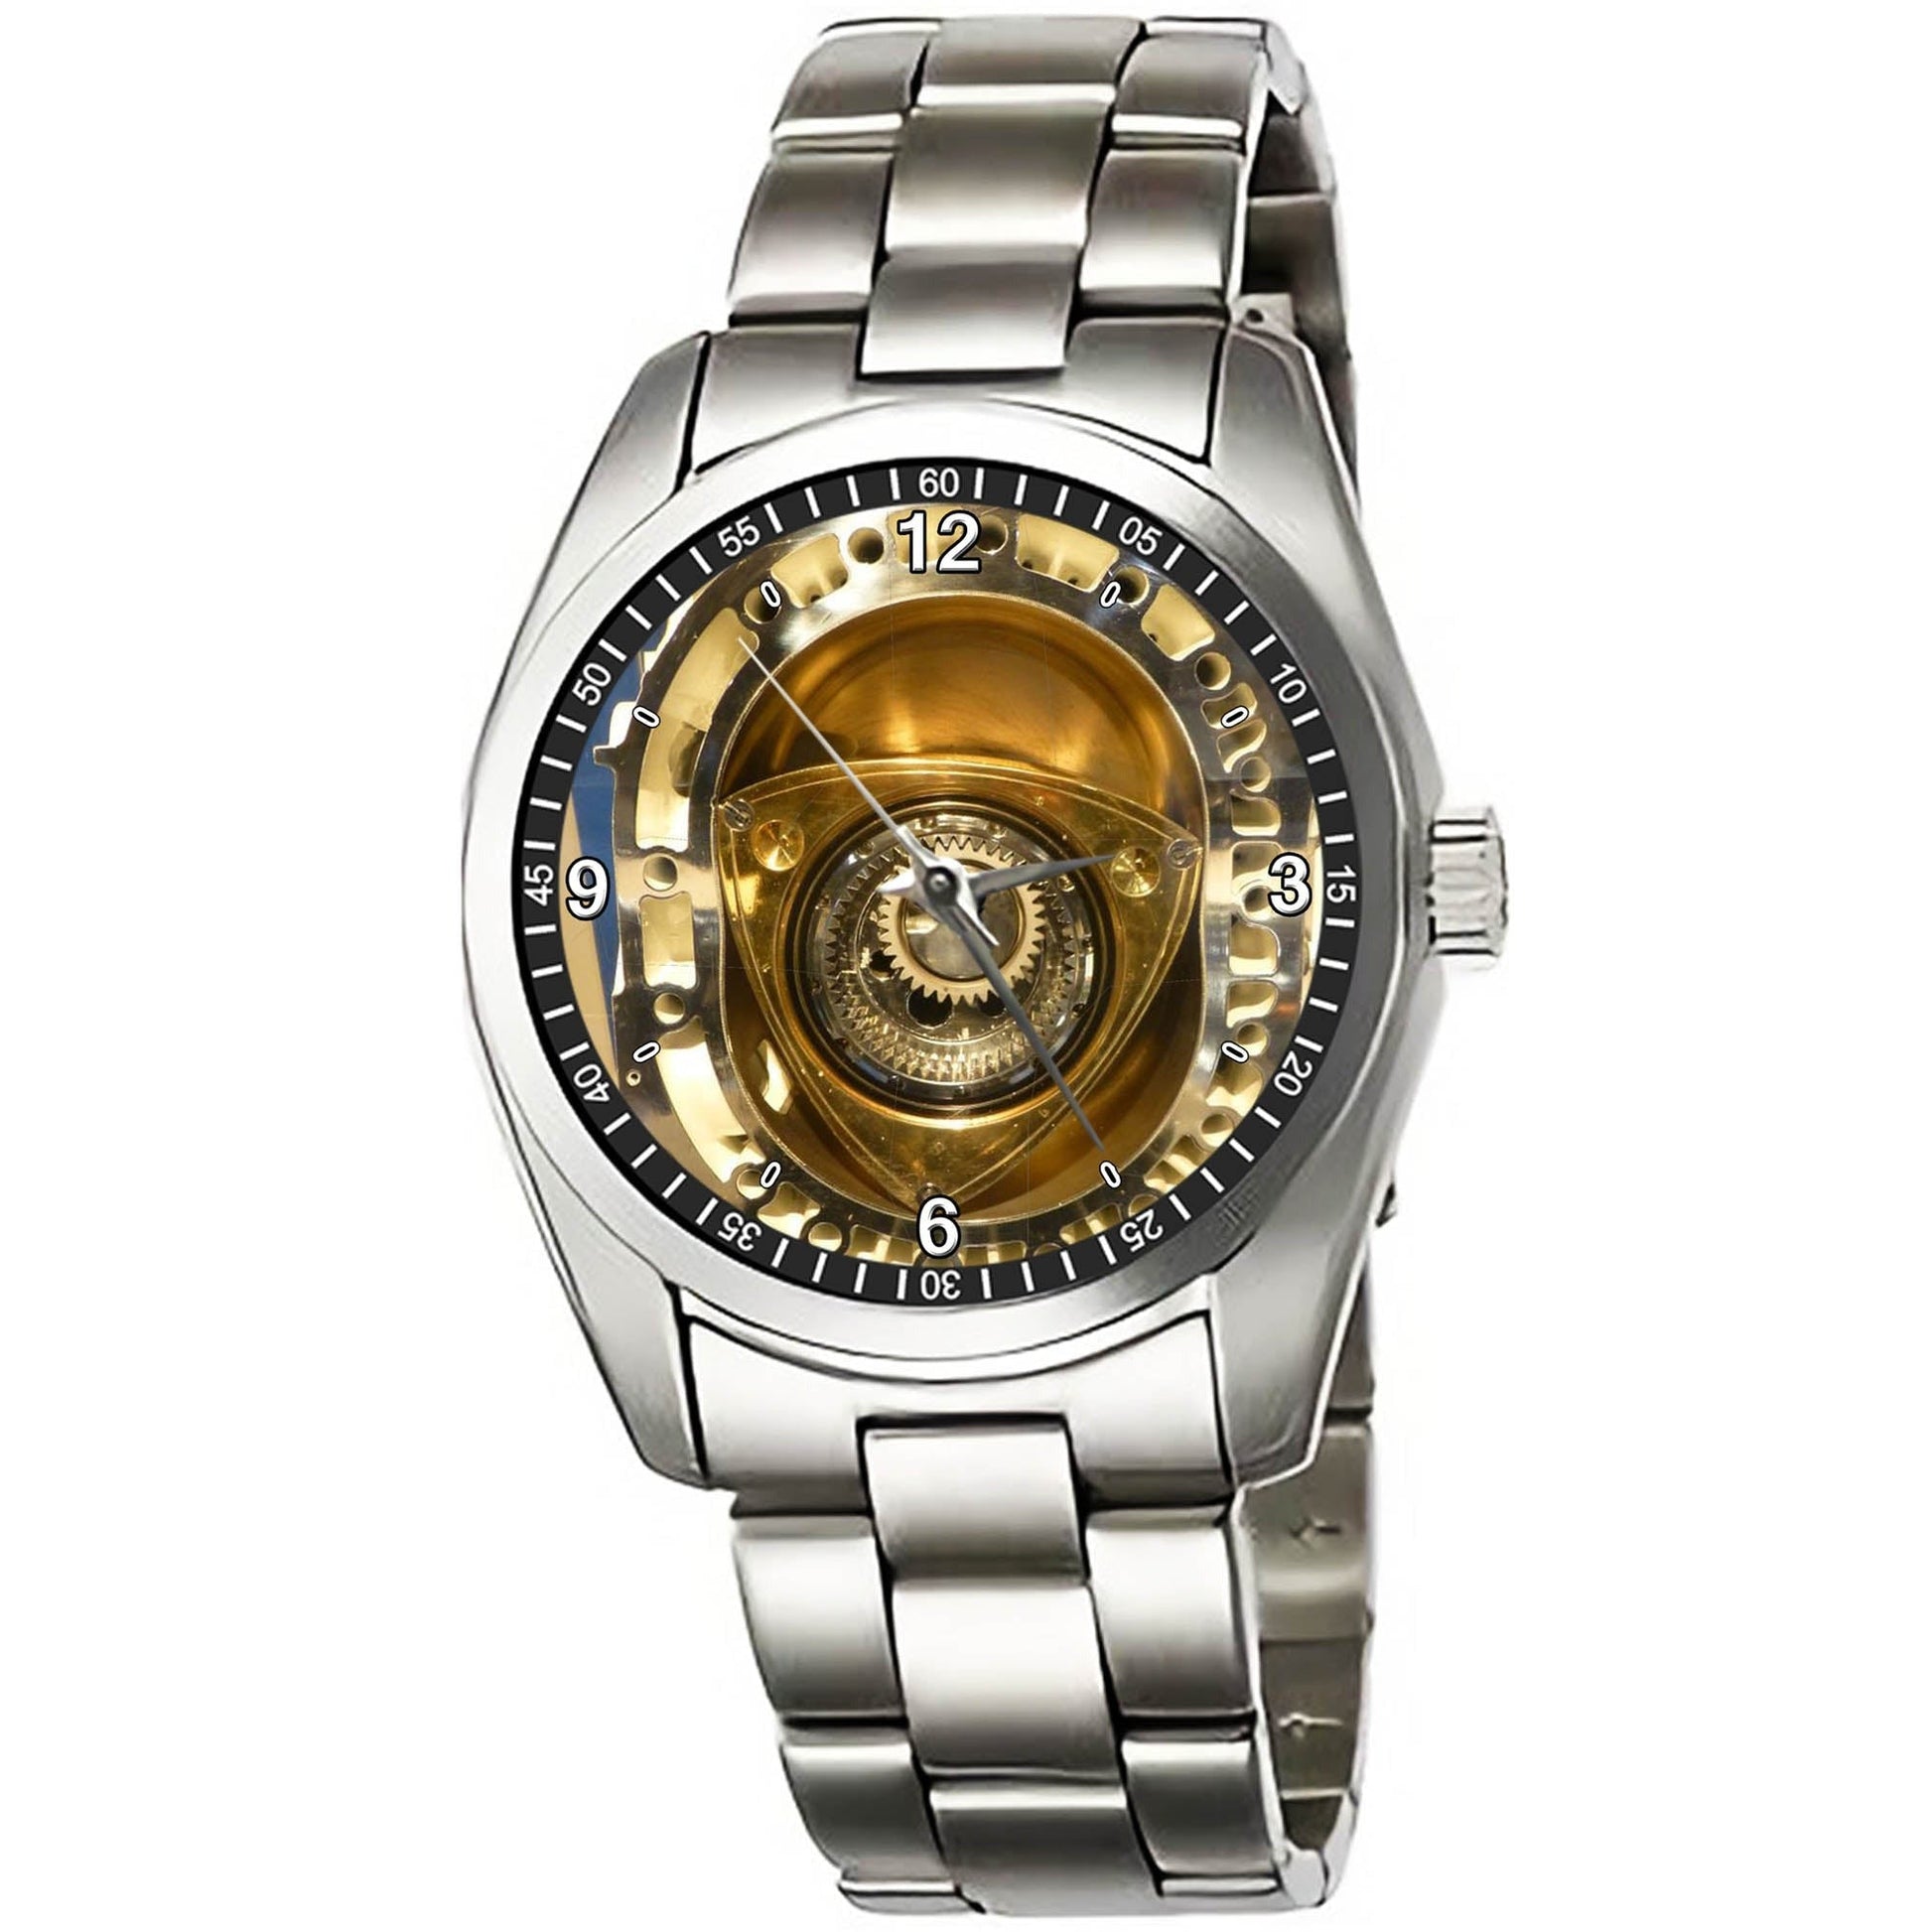 Mazda RX8 Rotary Engine Gold Plated Watches KP119